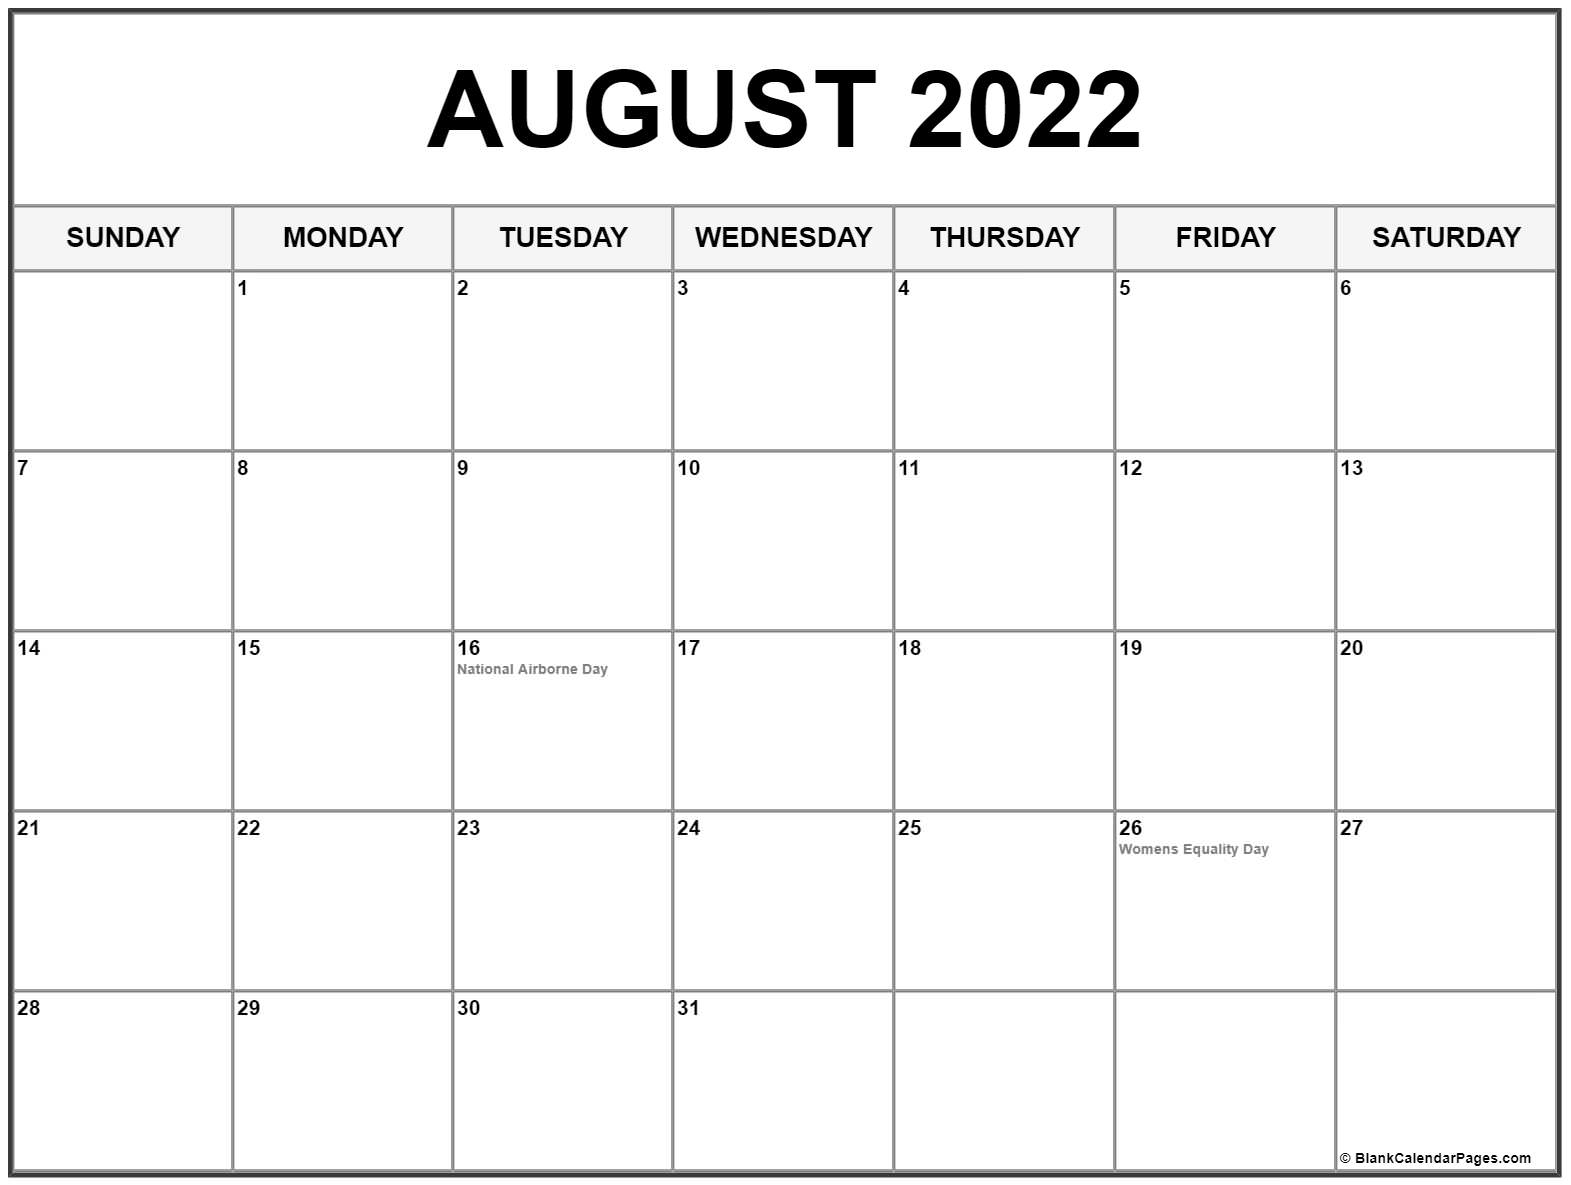 Pick Calendar For July And August 2022